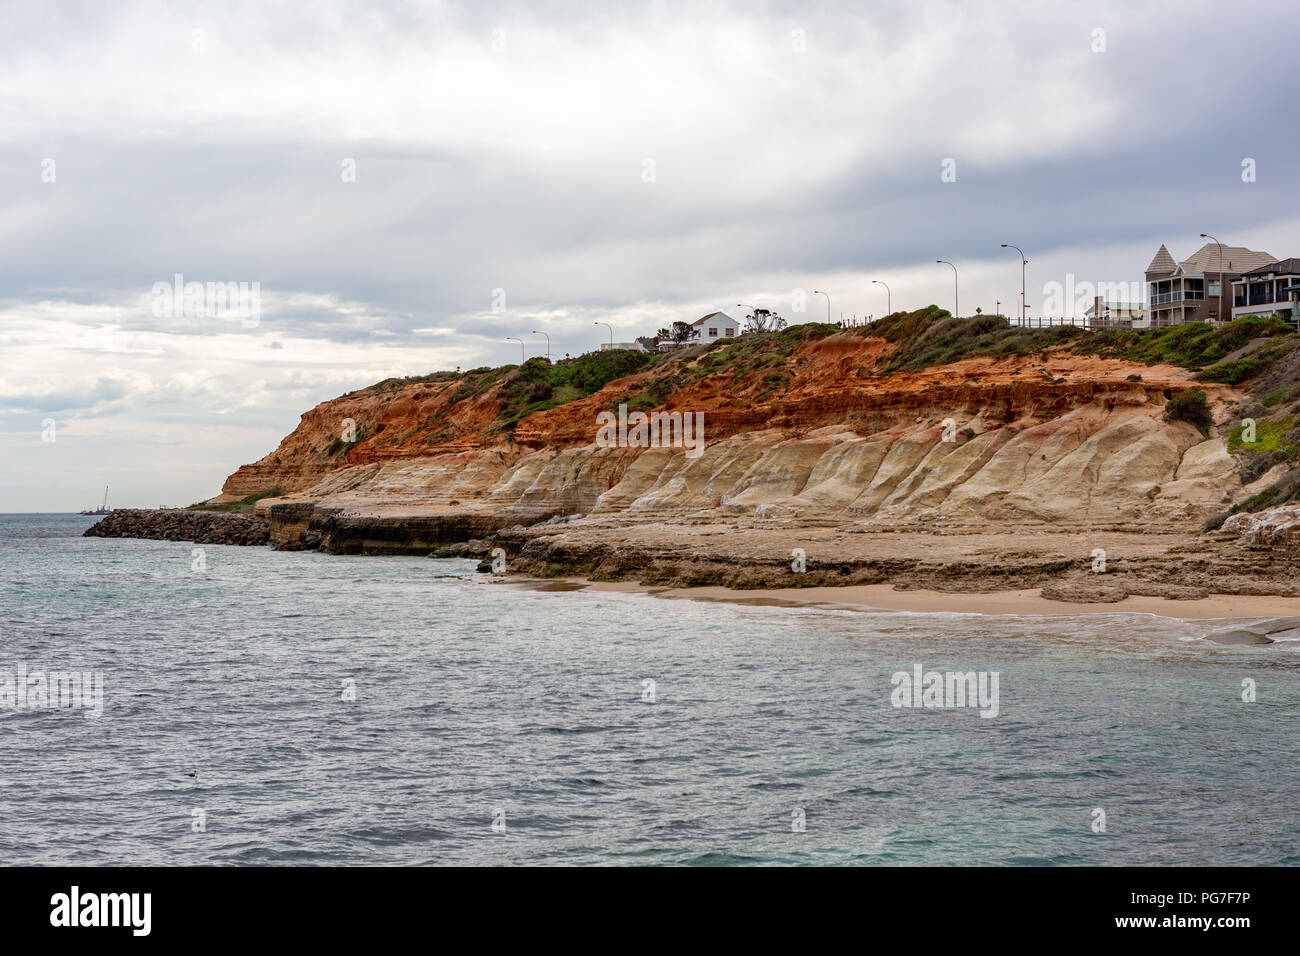 The iconic limestone cliff faces of the Port Noarlunga Beach South Australia on 23rd August 2018 Stock Photo